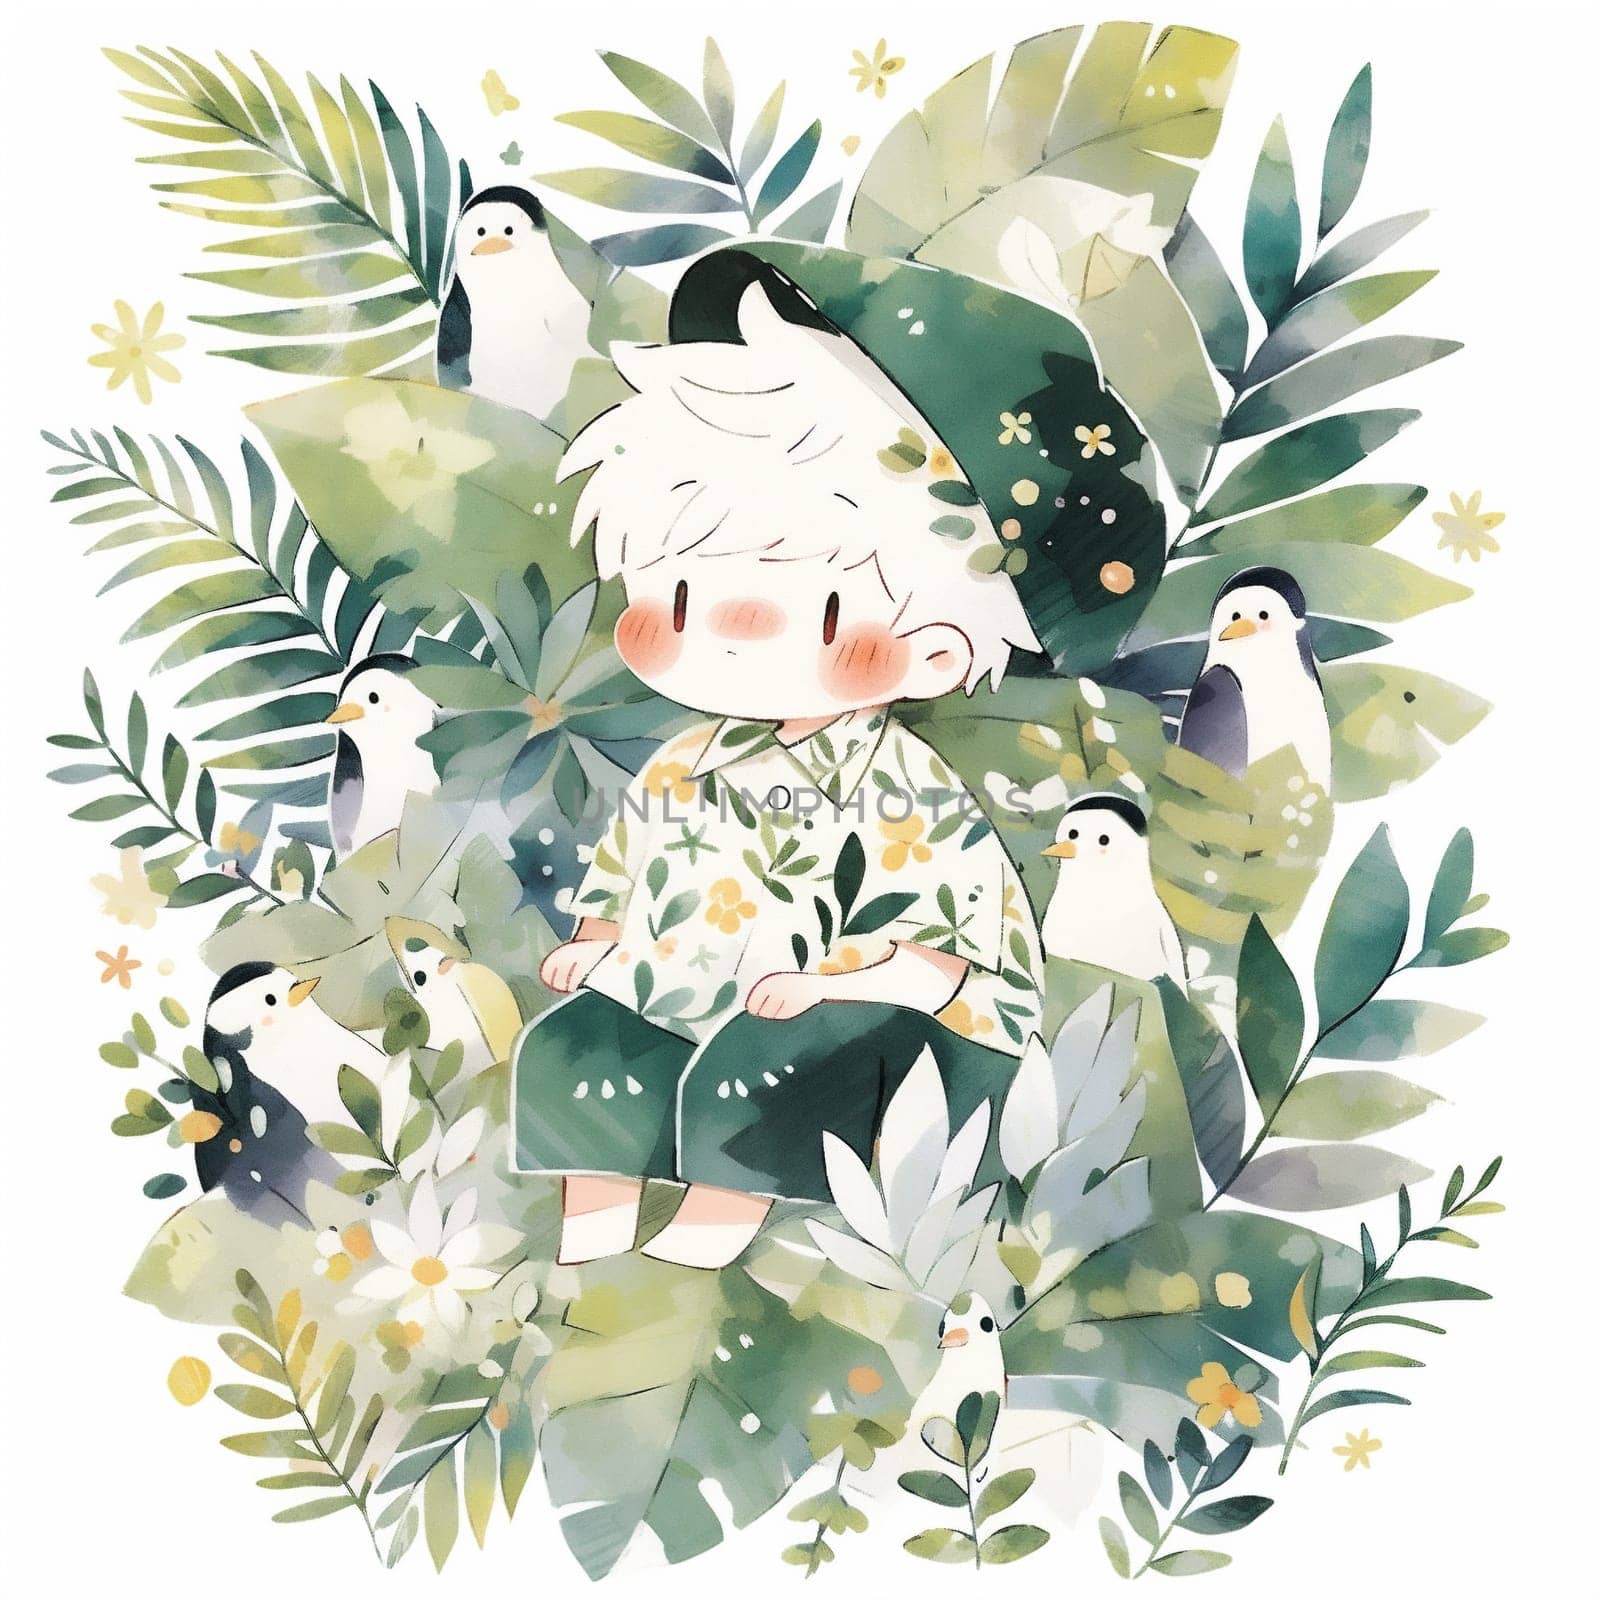 Boy in Watercolor Tropical Leaves Illustration. Art for Summer Design of Beauty Print, Card.